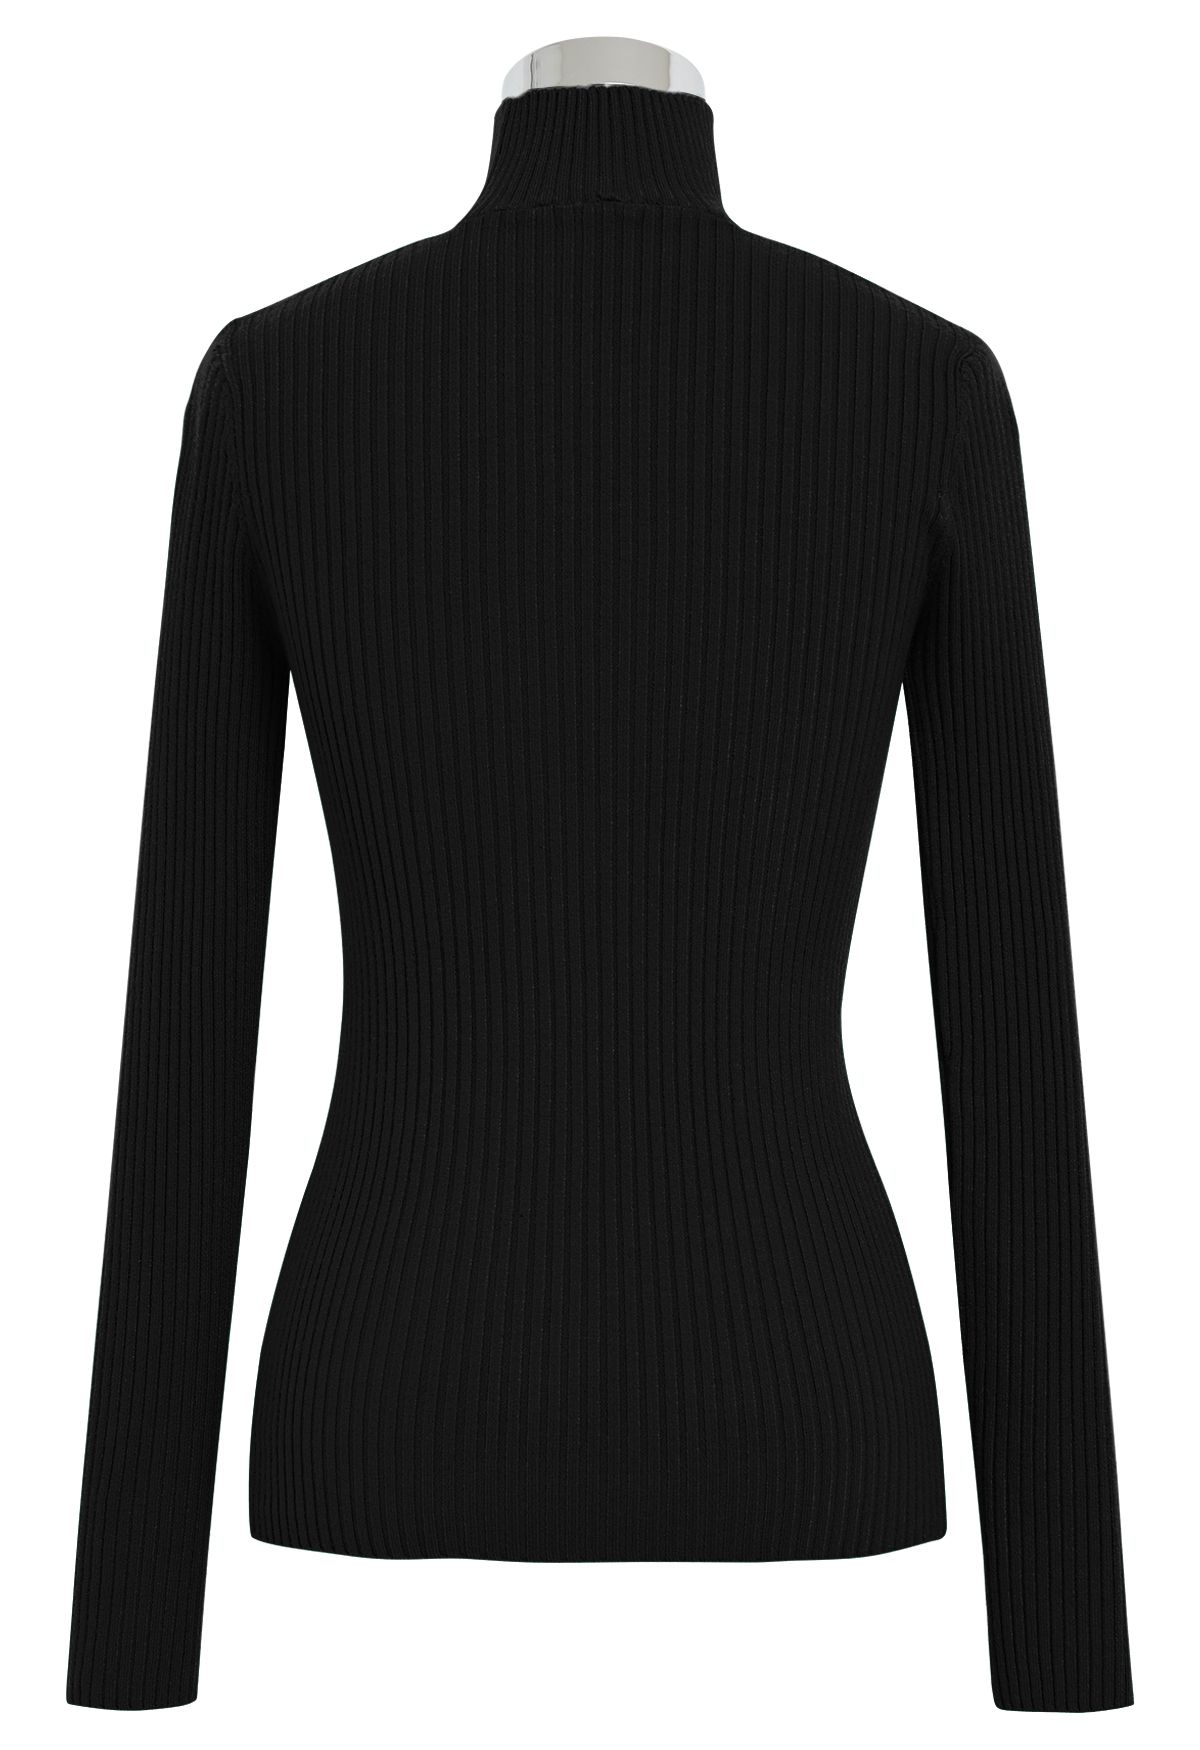 Cutout High Neck Rib Knit Top in Black - Retro, Indie and Unique Fashion